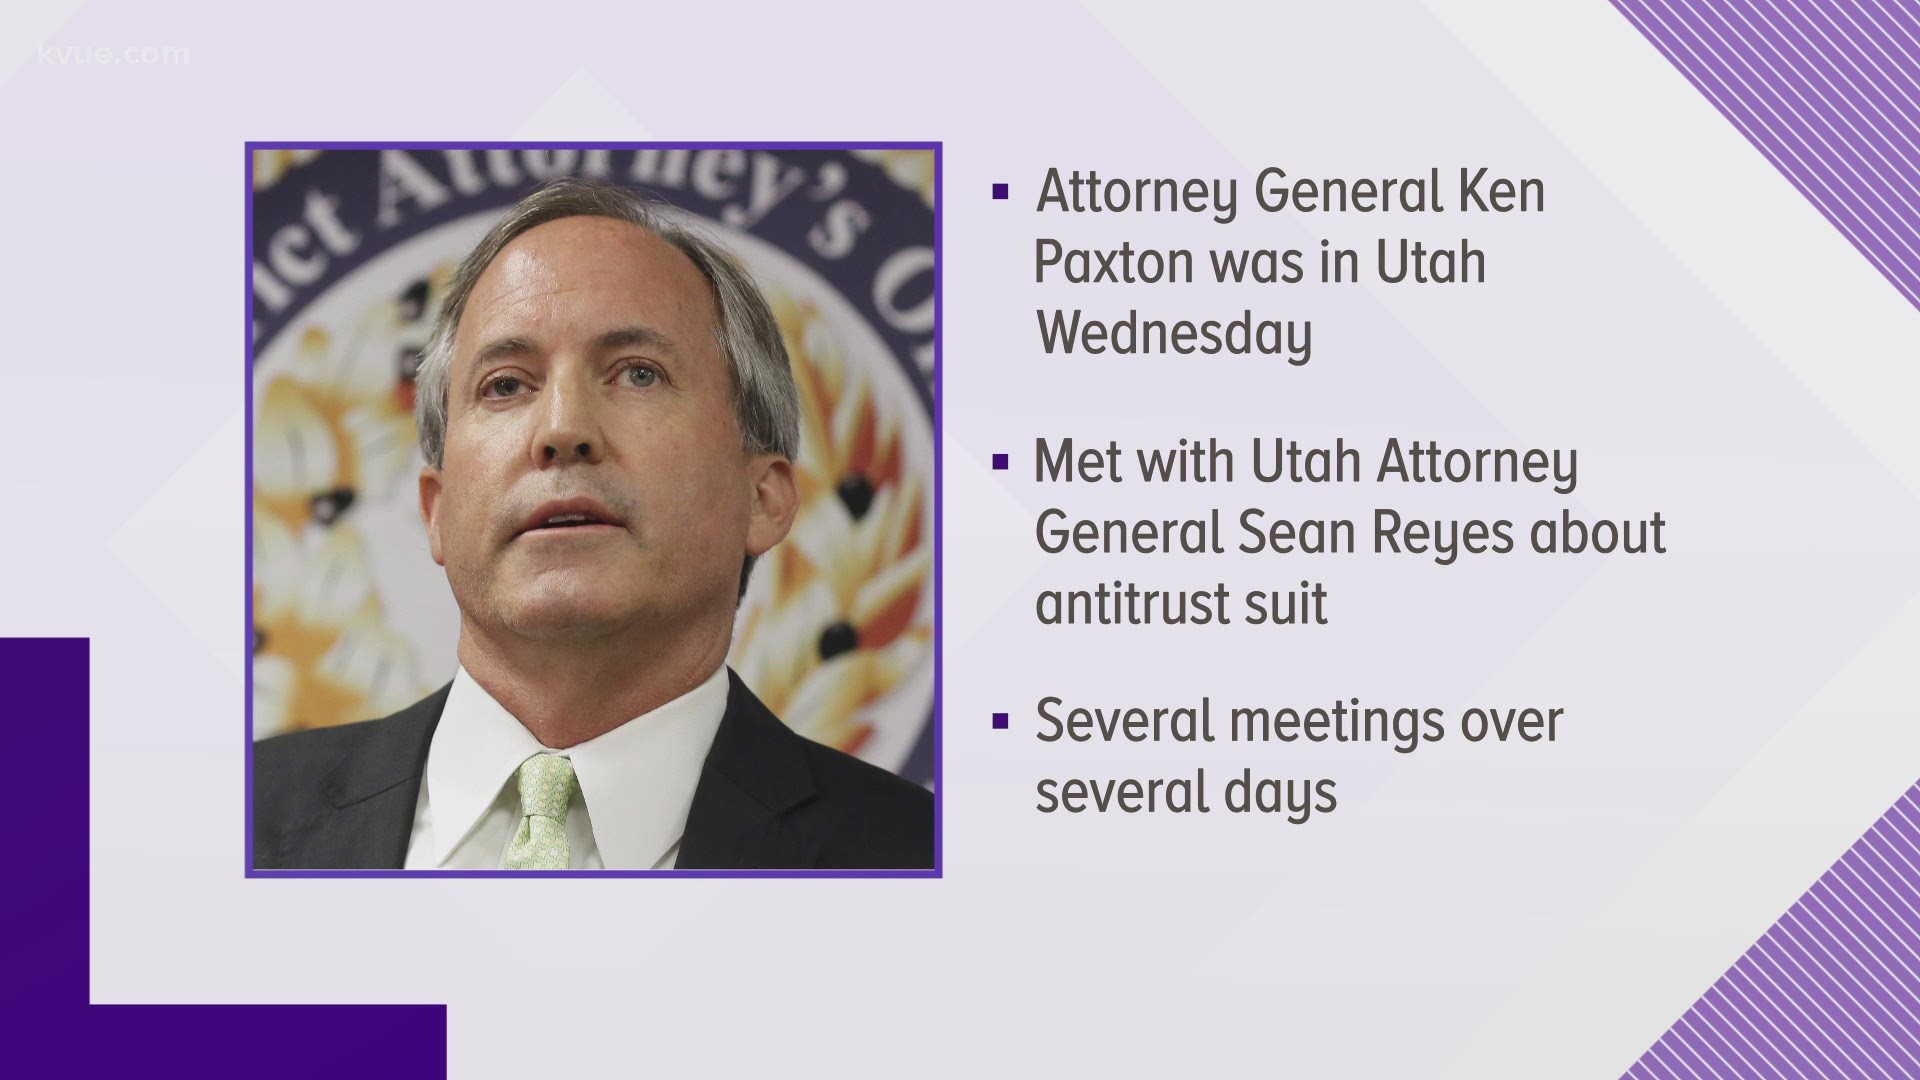 Texas Attorney General Ken Paxton and his wife, State Sen. Angela Paxton, were out of state on a business trip.